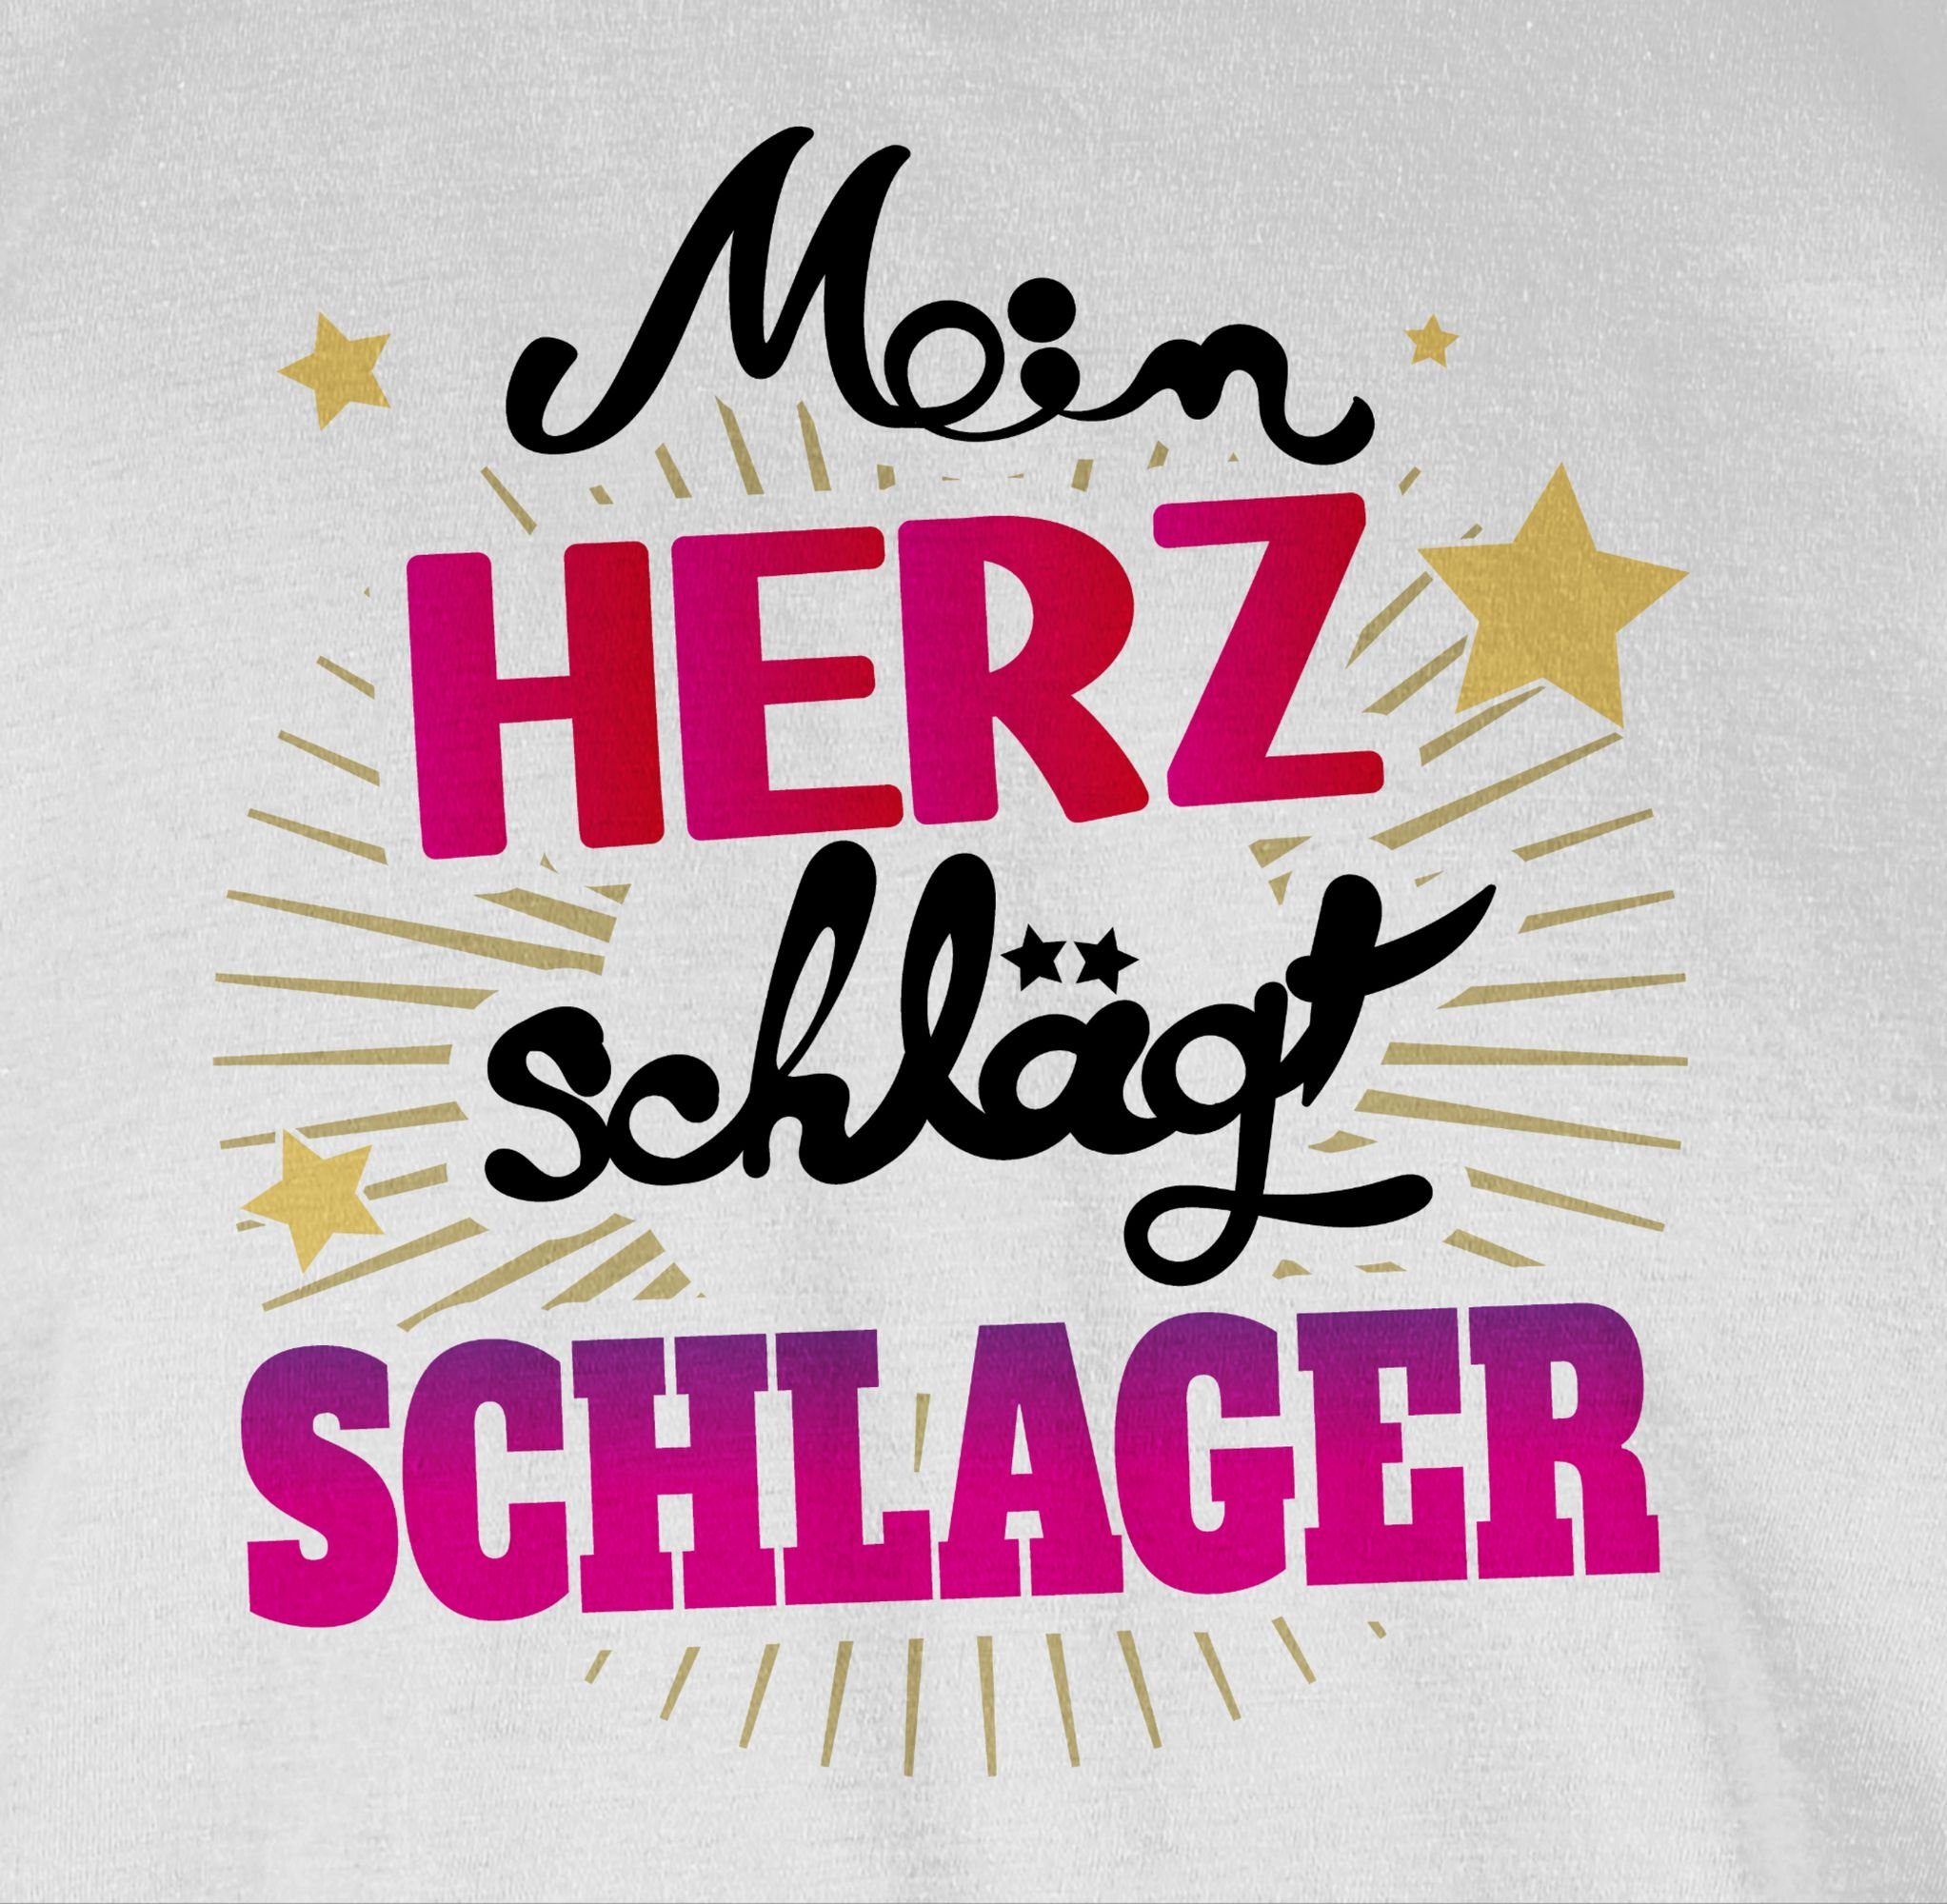 Outfit Herz Party Outfit Schlager Mein 1 Weiß Schlager Schlagerparty schlägt T-Shirt Shirtracer